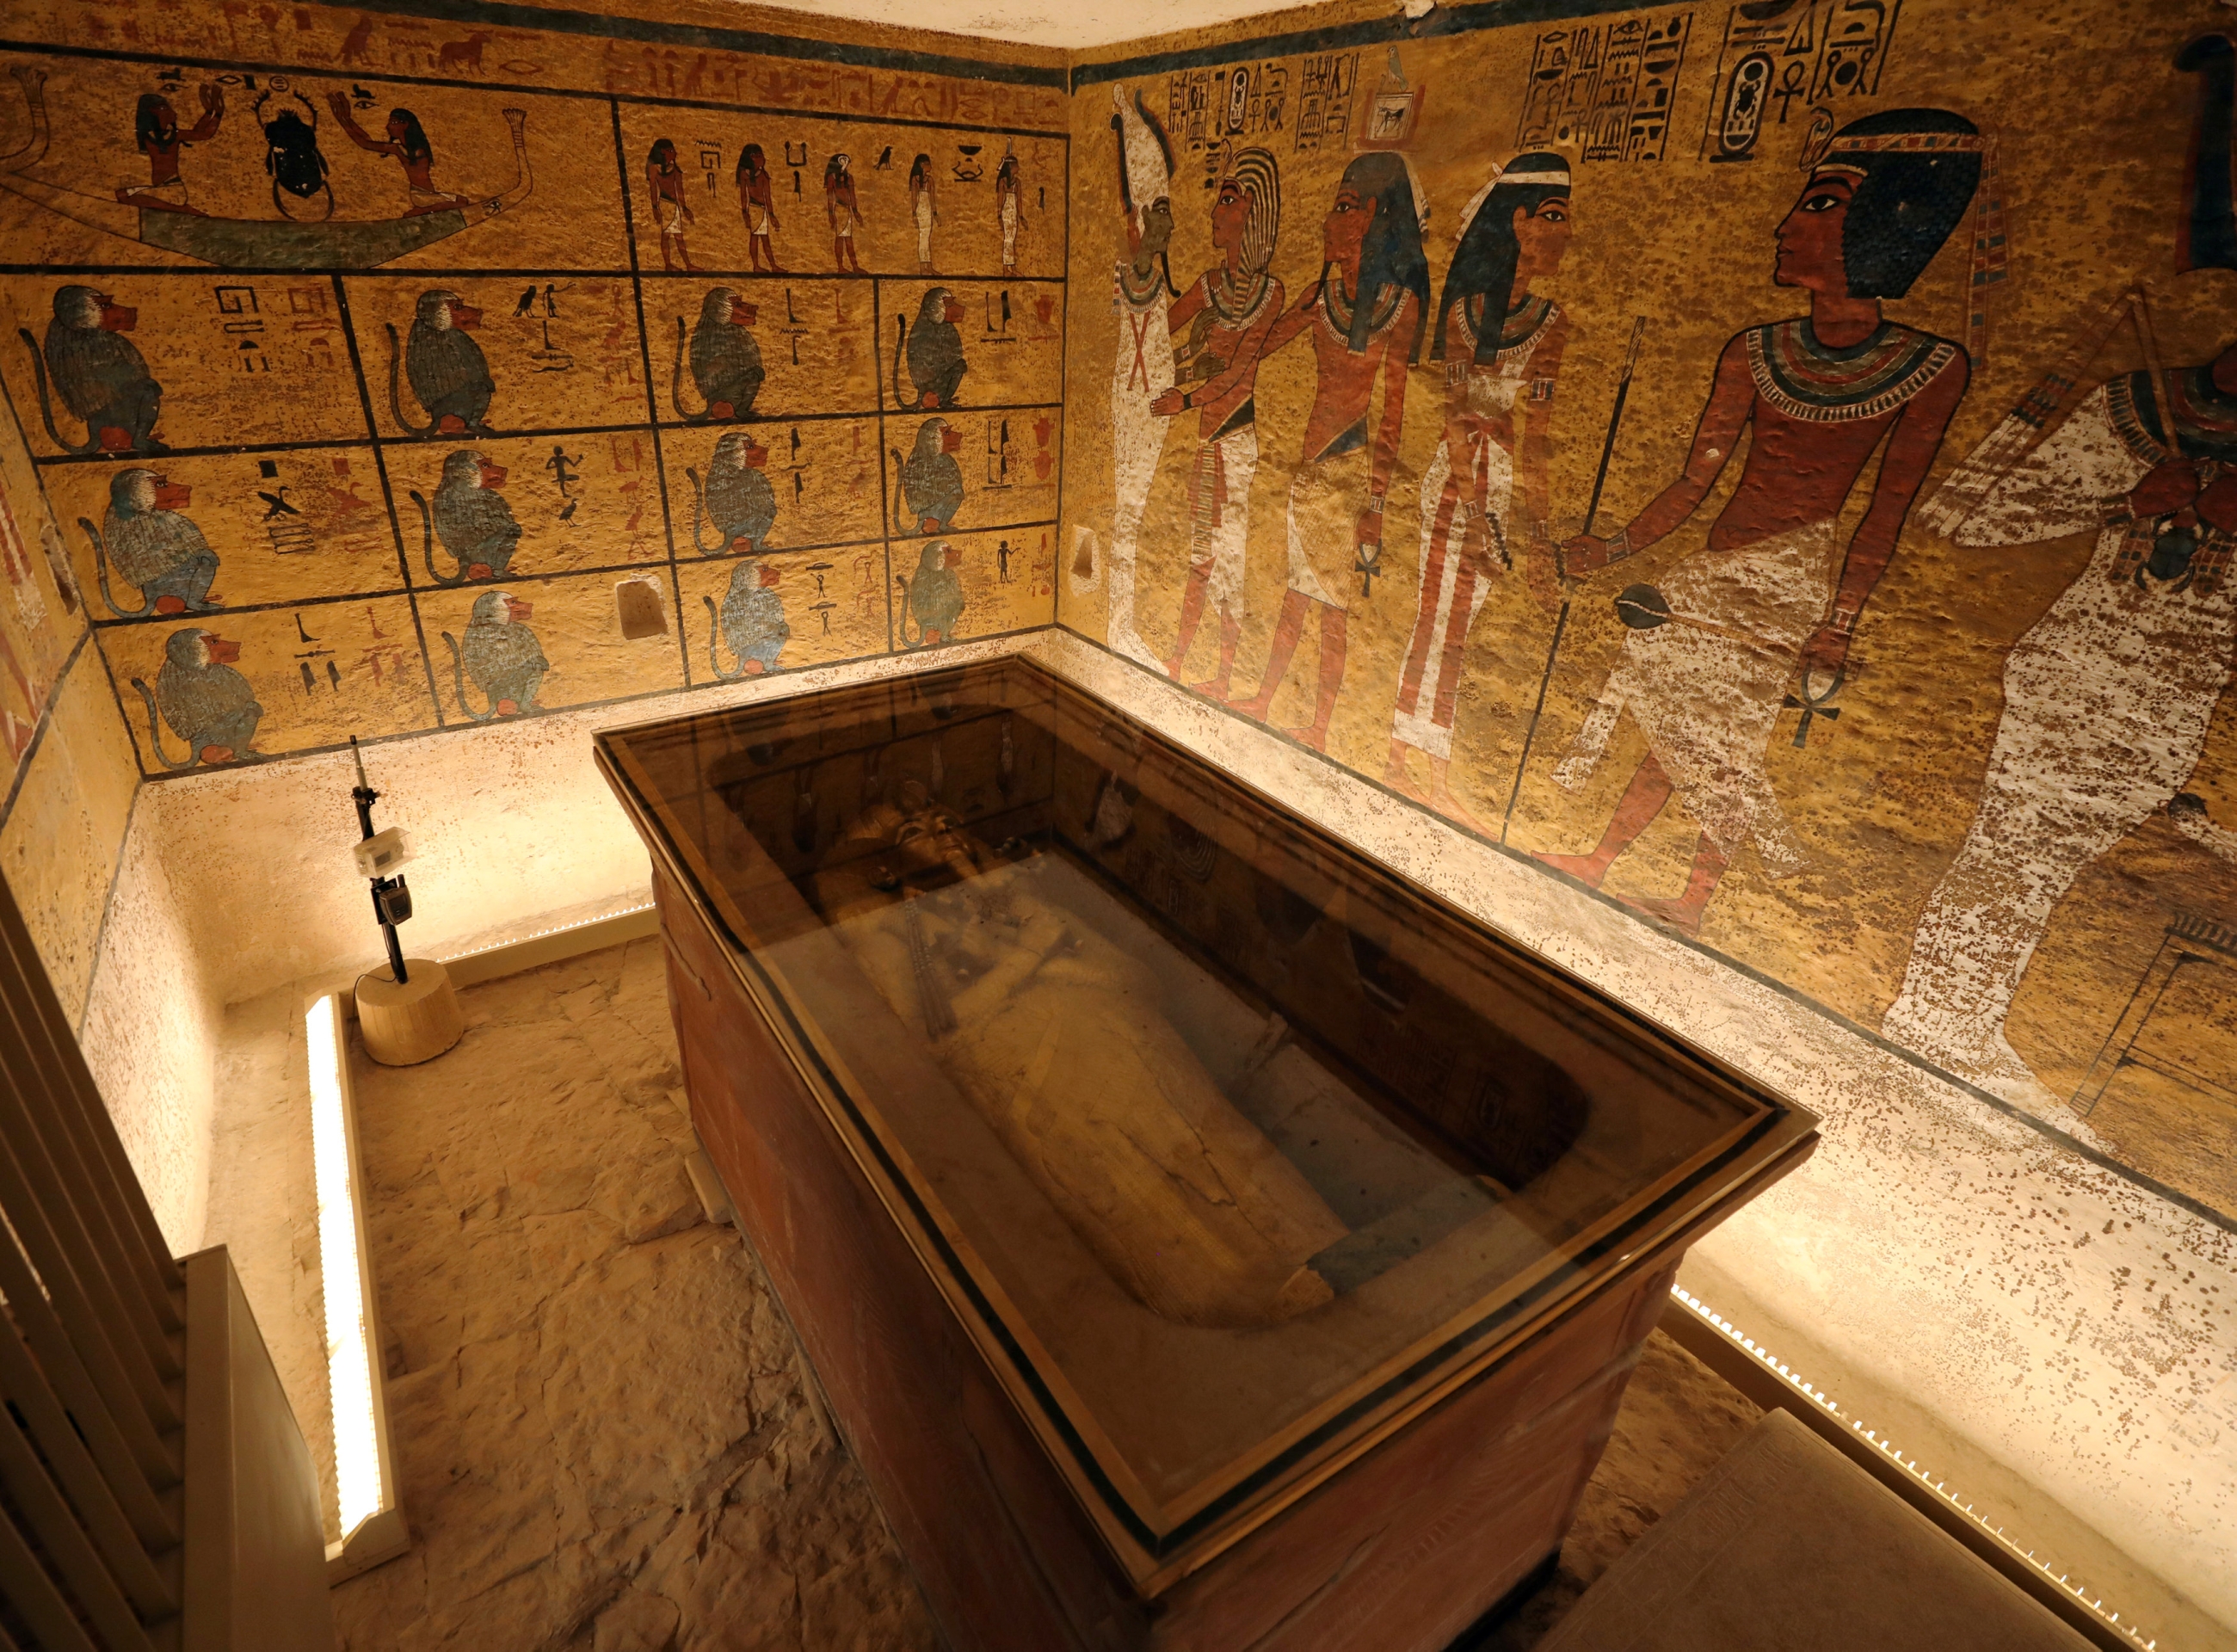 The tomb first became a worldwide sensation when it was discvovered by British archaeologist Howard Carter in 1922, partly because it was so well preserved. But since then dust, damp and visitors have all taken their toll on the site and its treasures (Reuters).